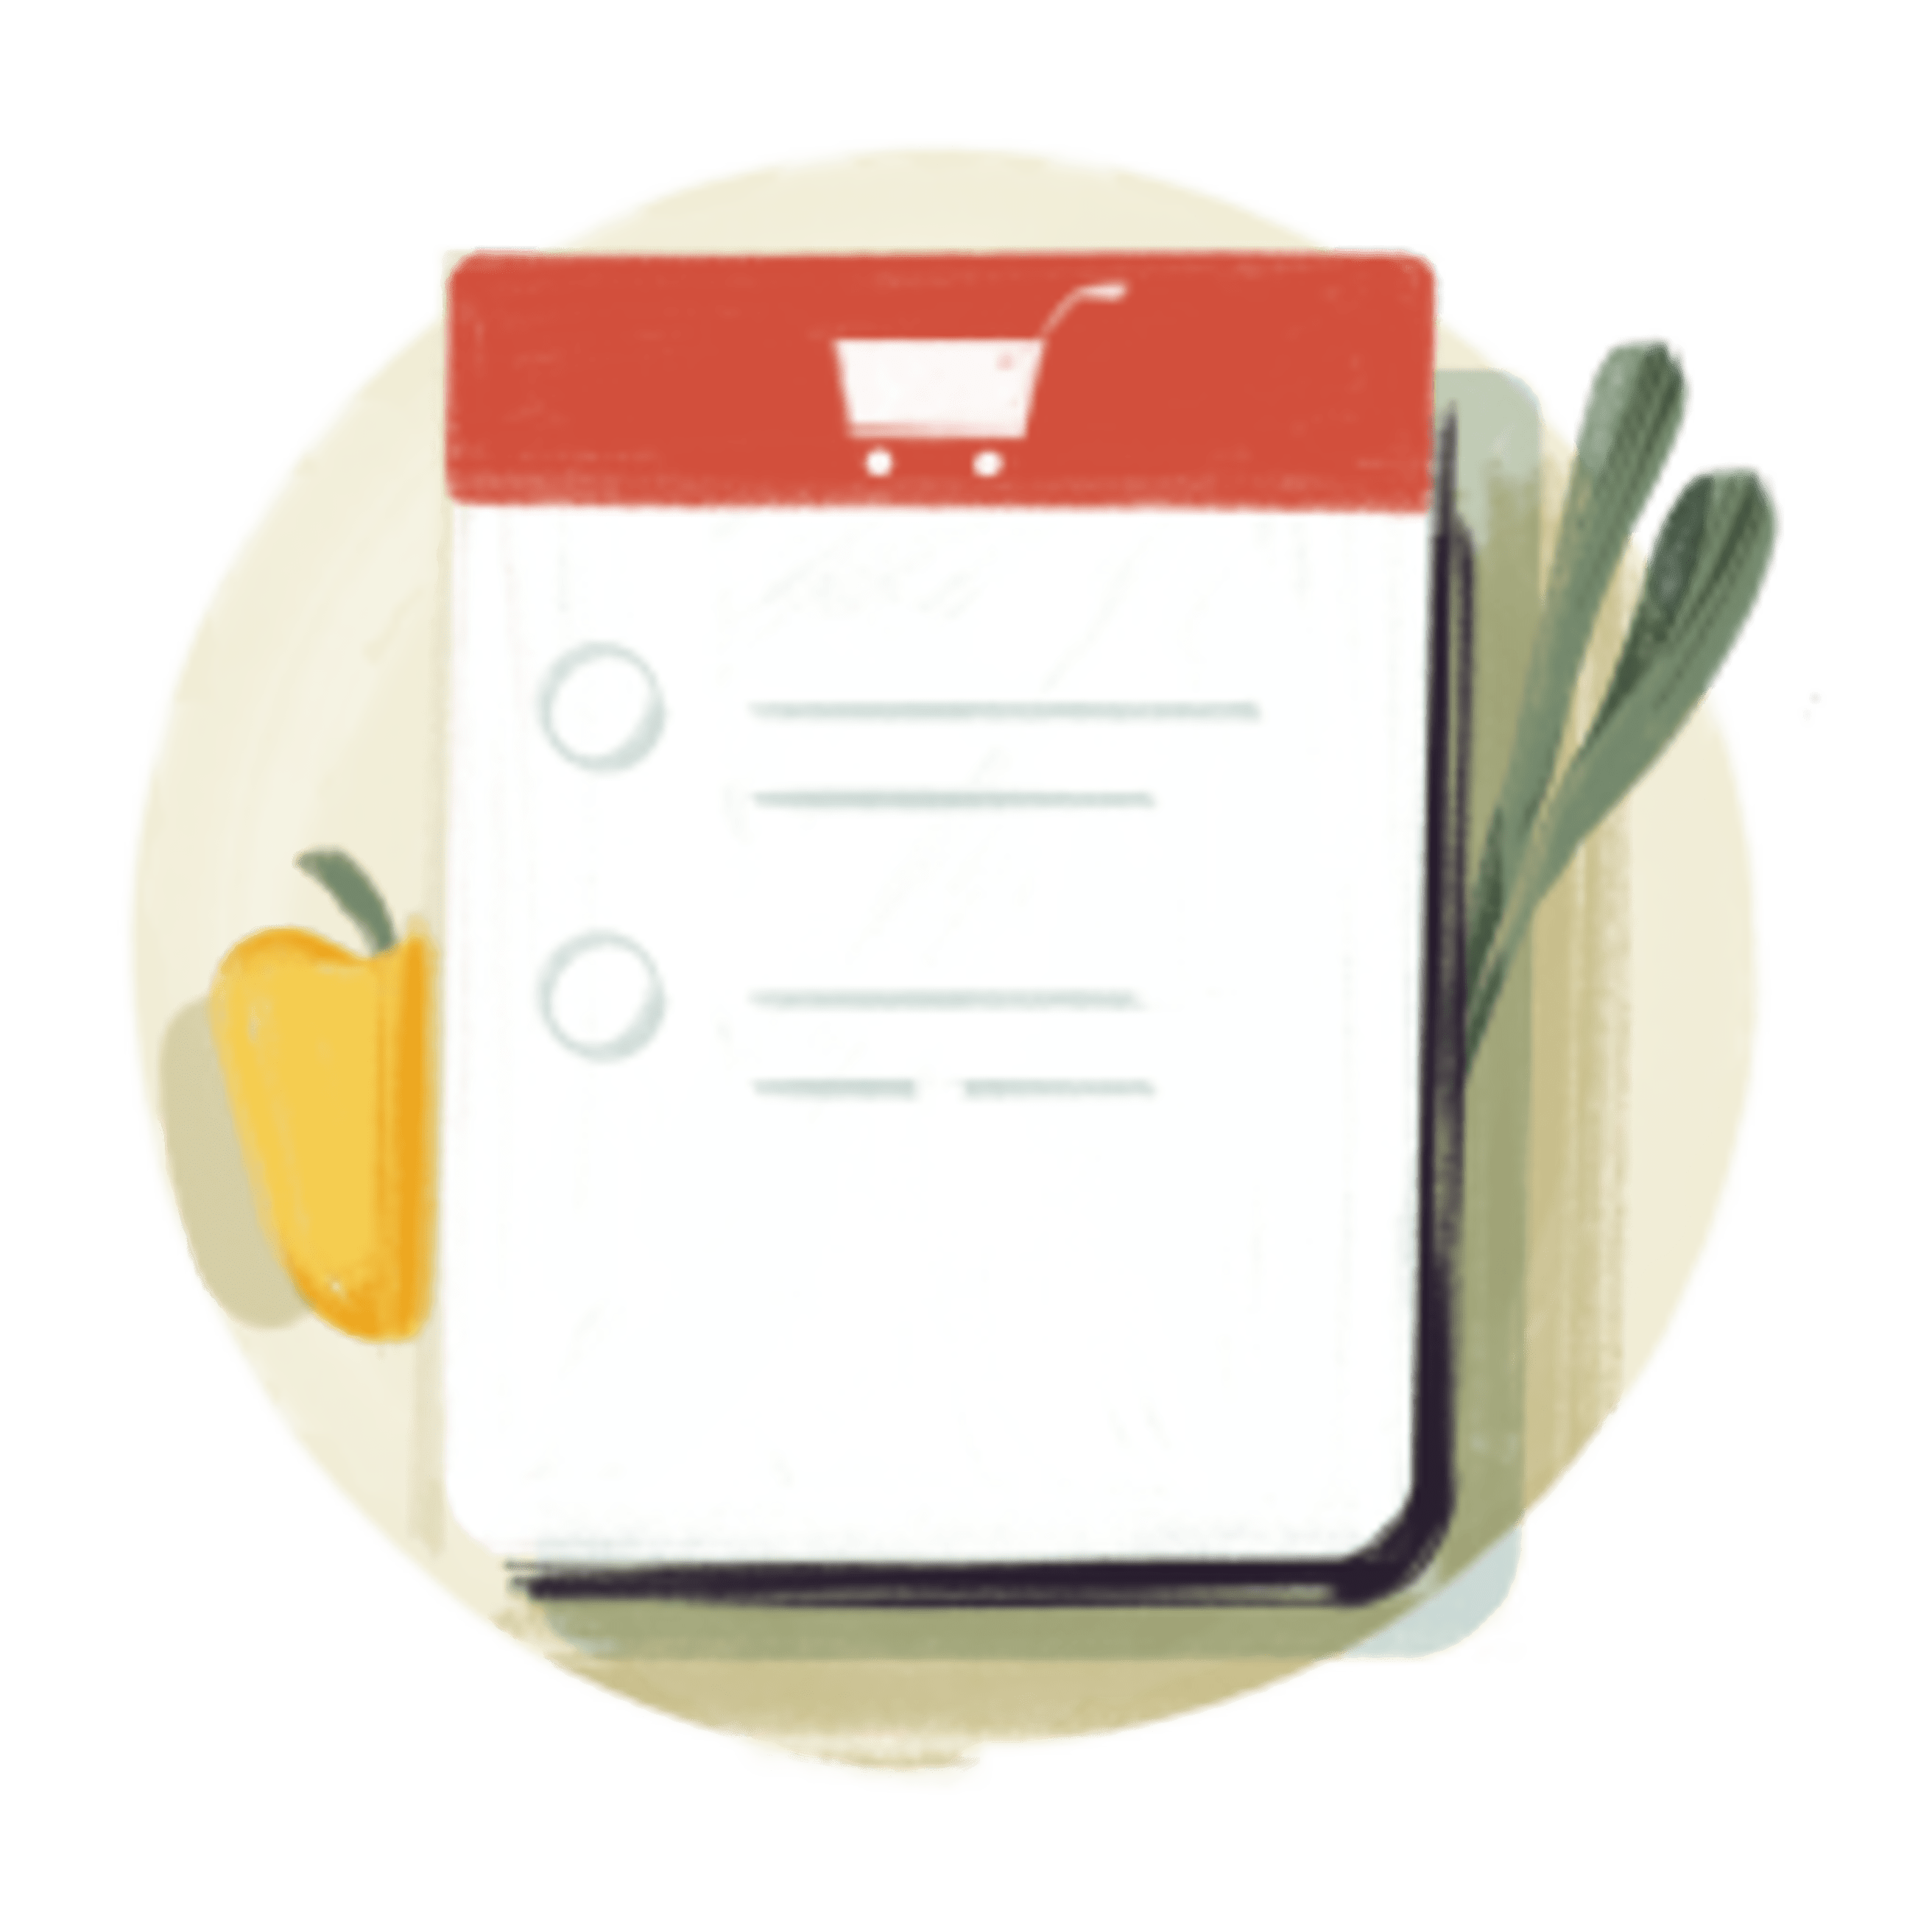 Templates - Grocery list - icon